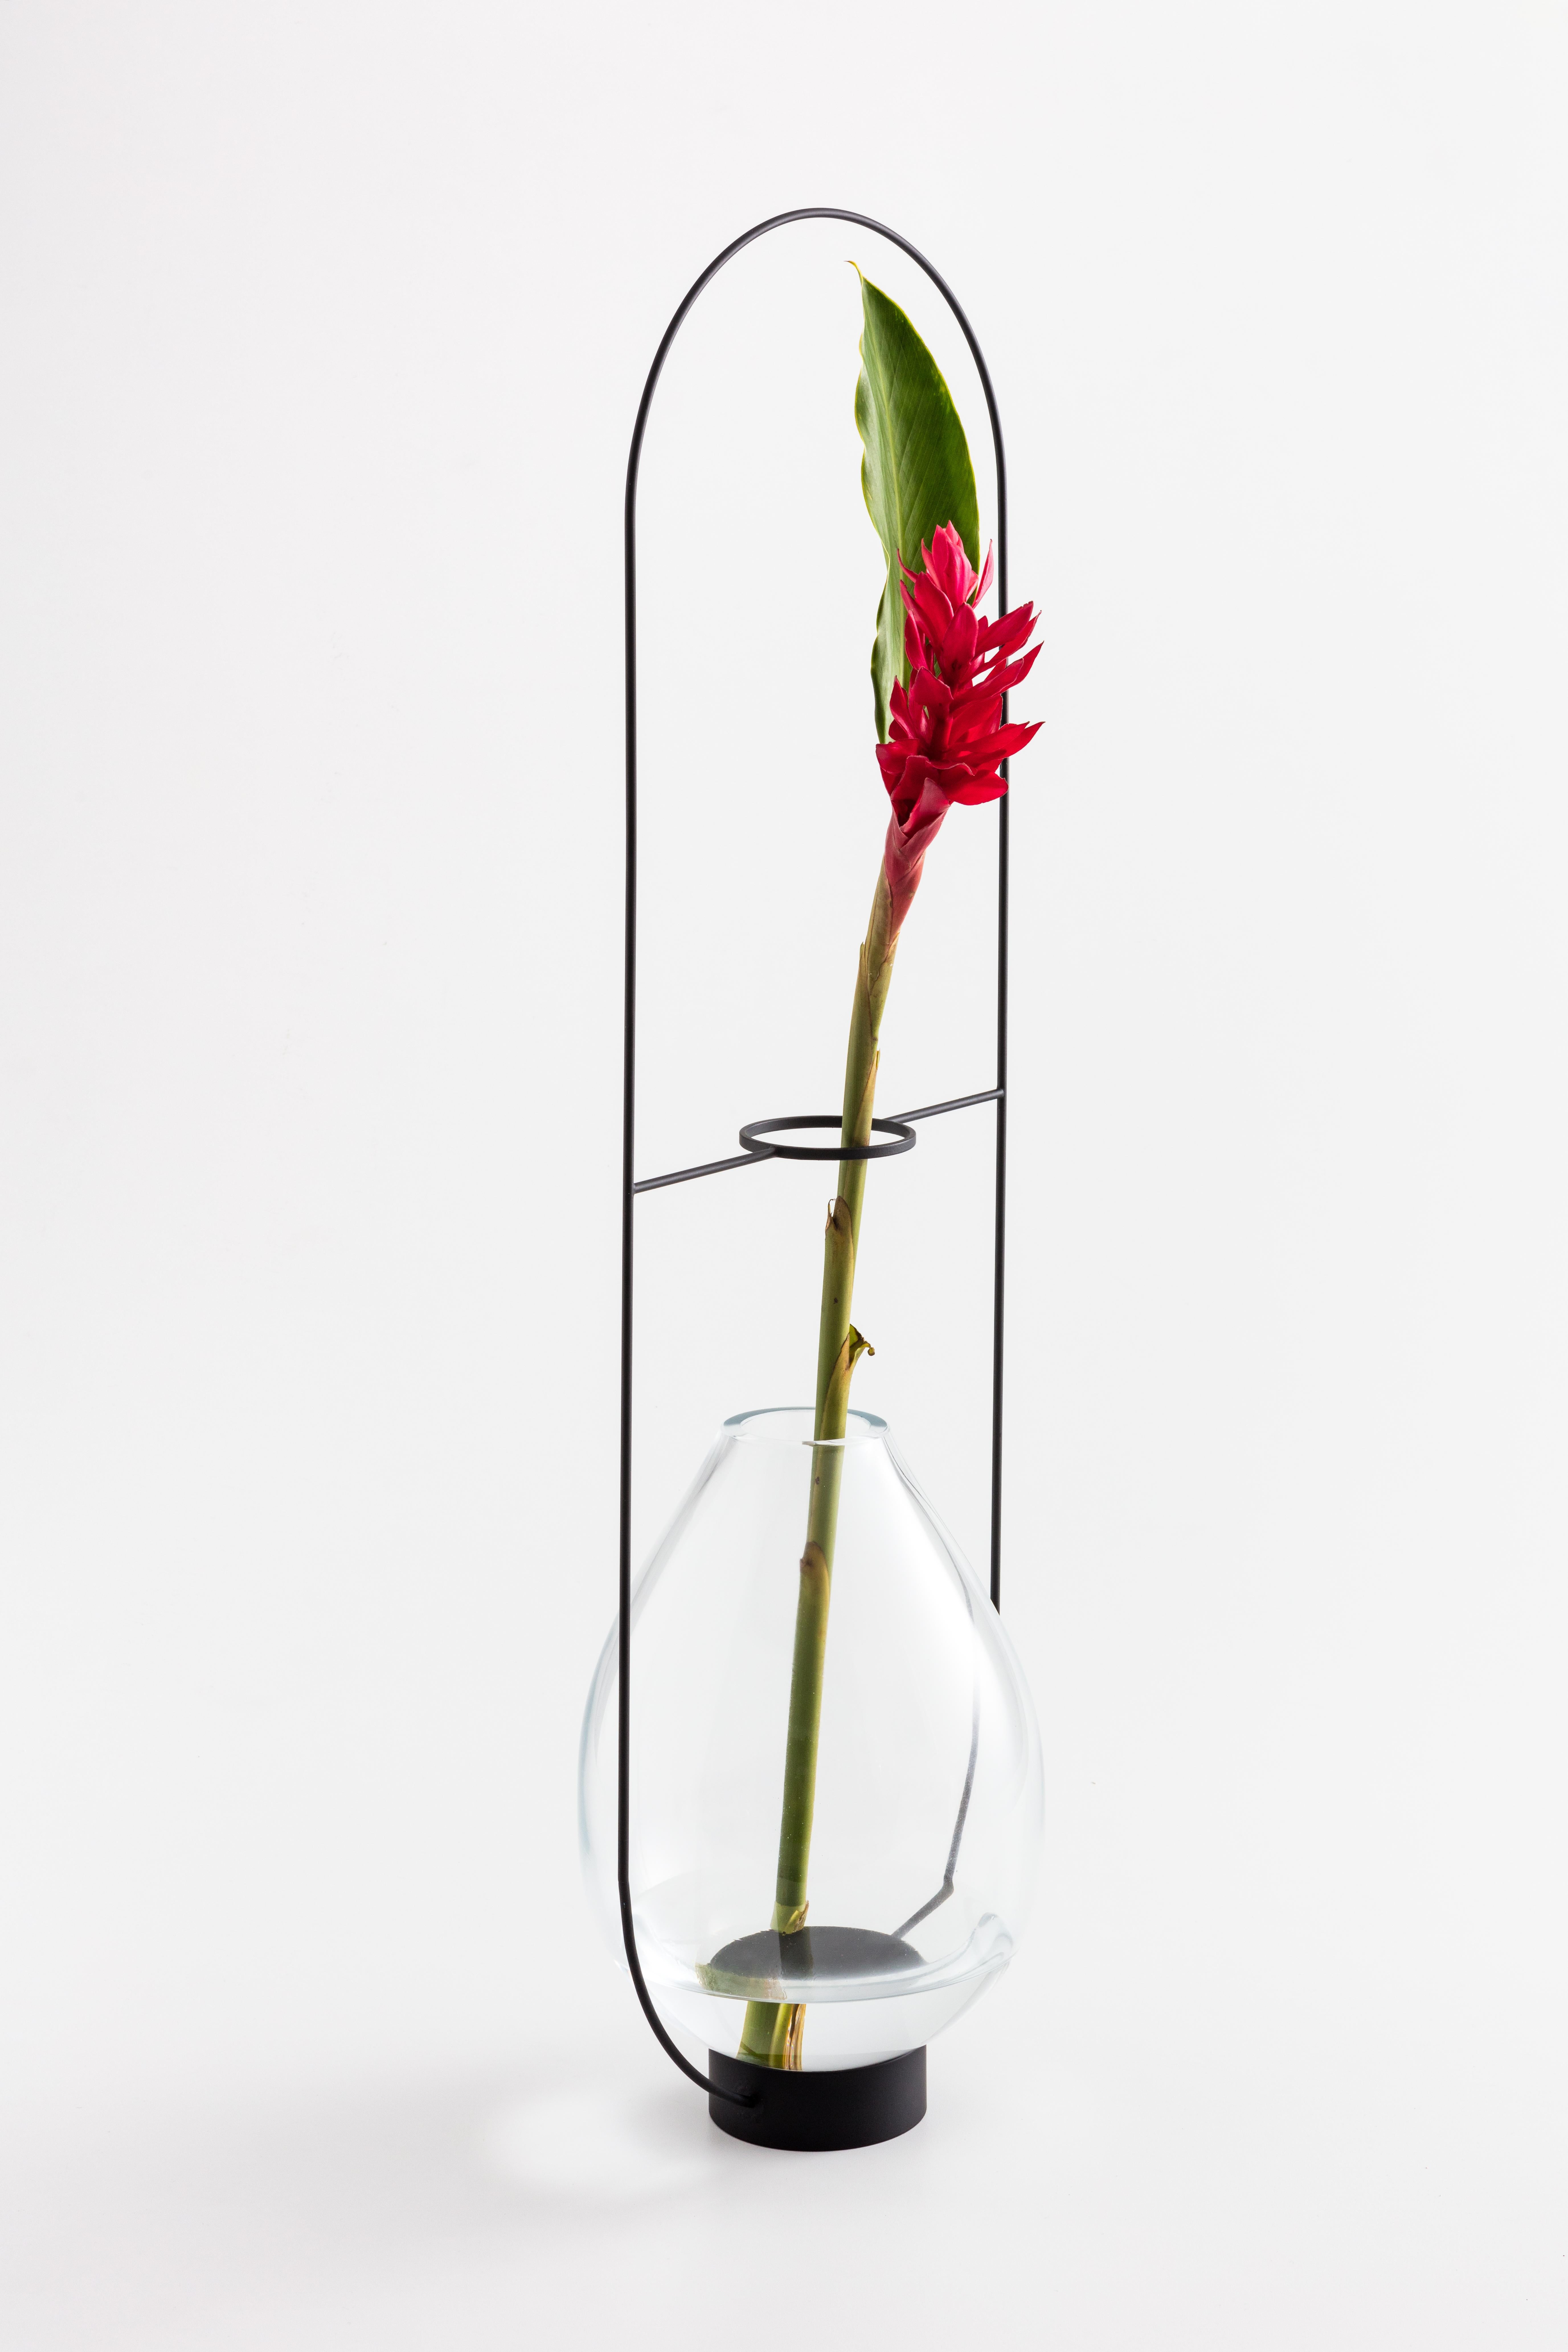 ELO G vase by Paulo Goldstein, Brazilian contemporary design, blown glass and steel is part of a series of vases inspired in the observation of the natural lines of the flowers and leaves held in them, where the lines of the vases were designed to